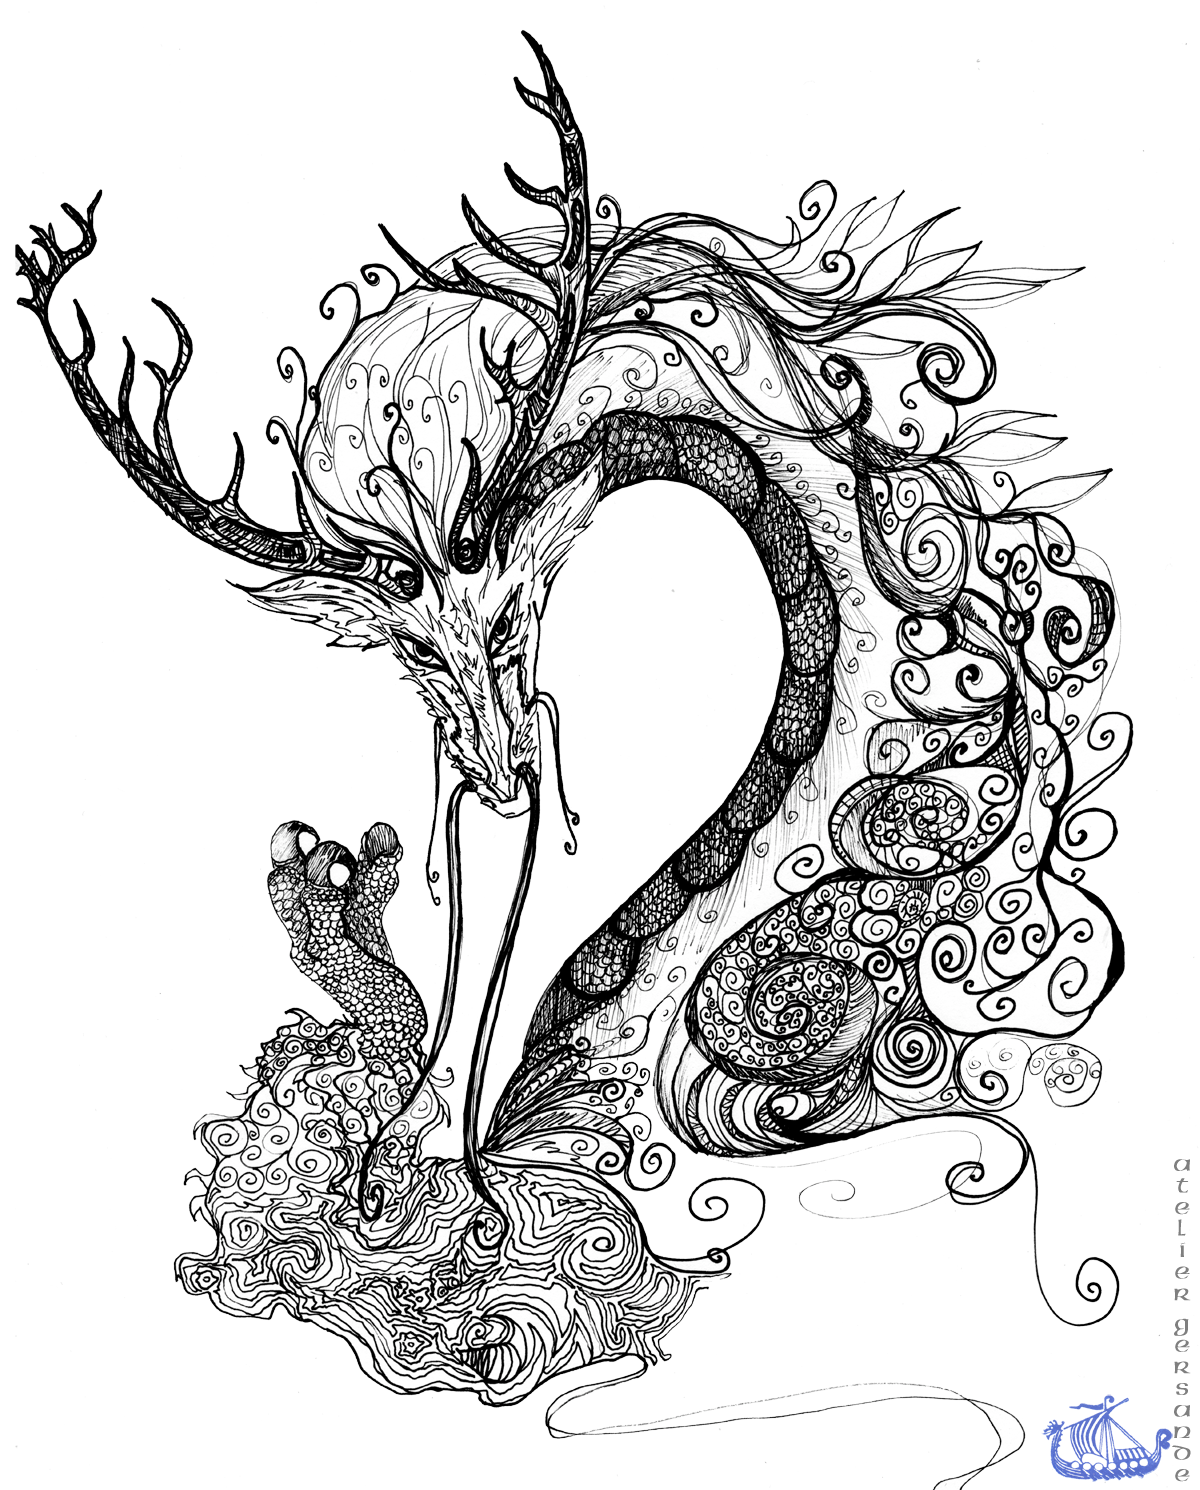 A drawing of a dragon with antlers and claws, and skin resembling seashells.